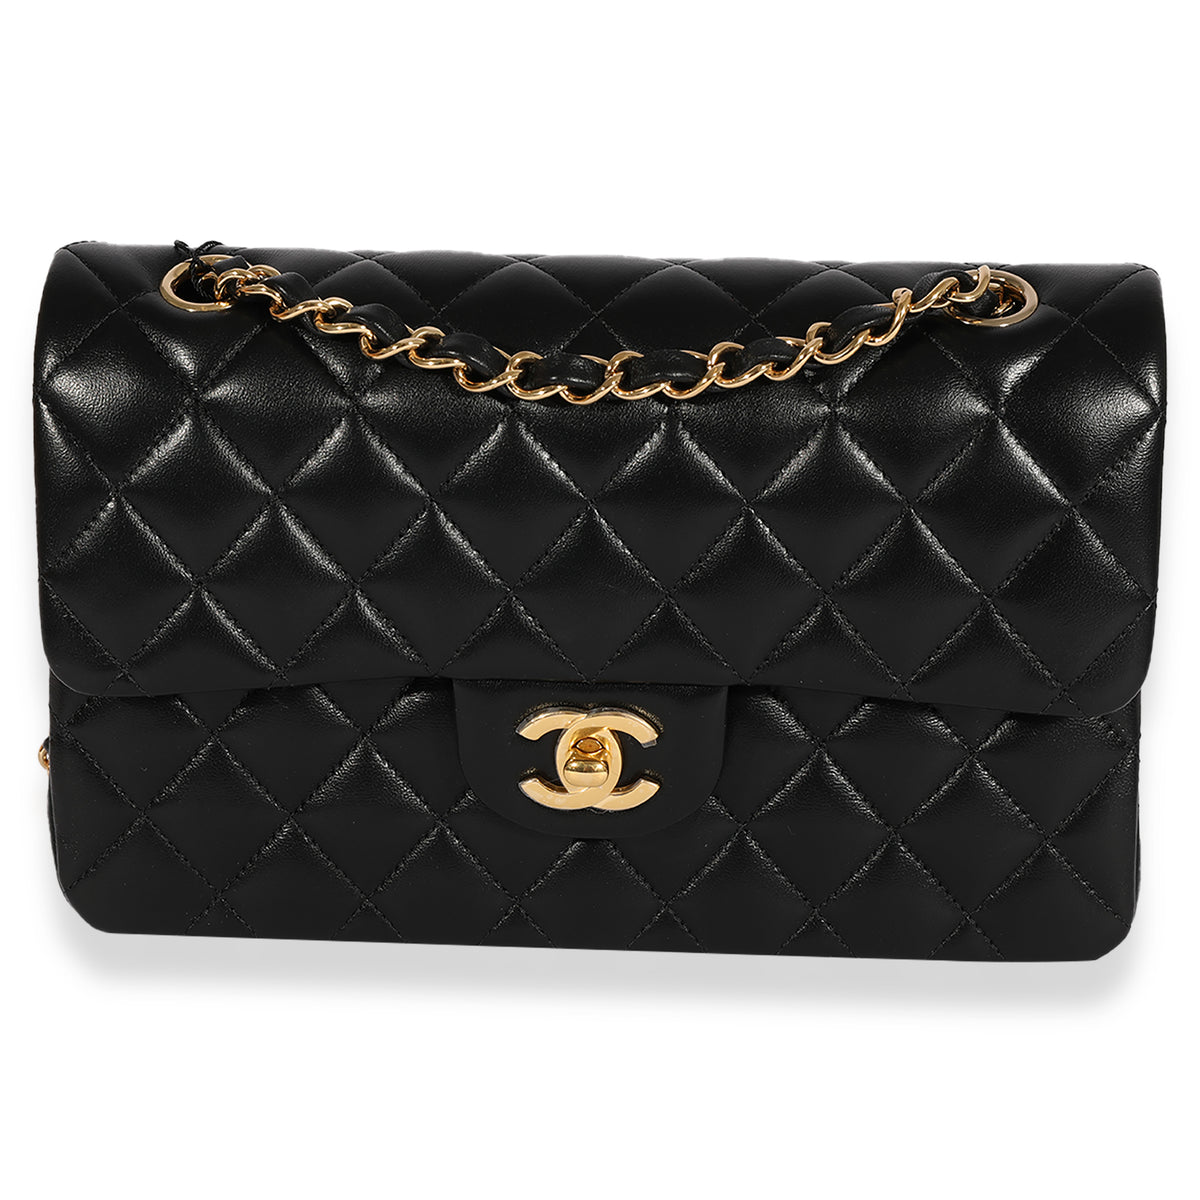 Chanel Vintage Black Quilted Lambskin Small Classic Double Flap Bag, myGemma, DE